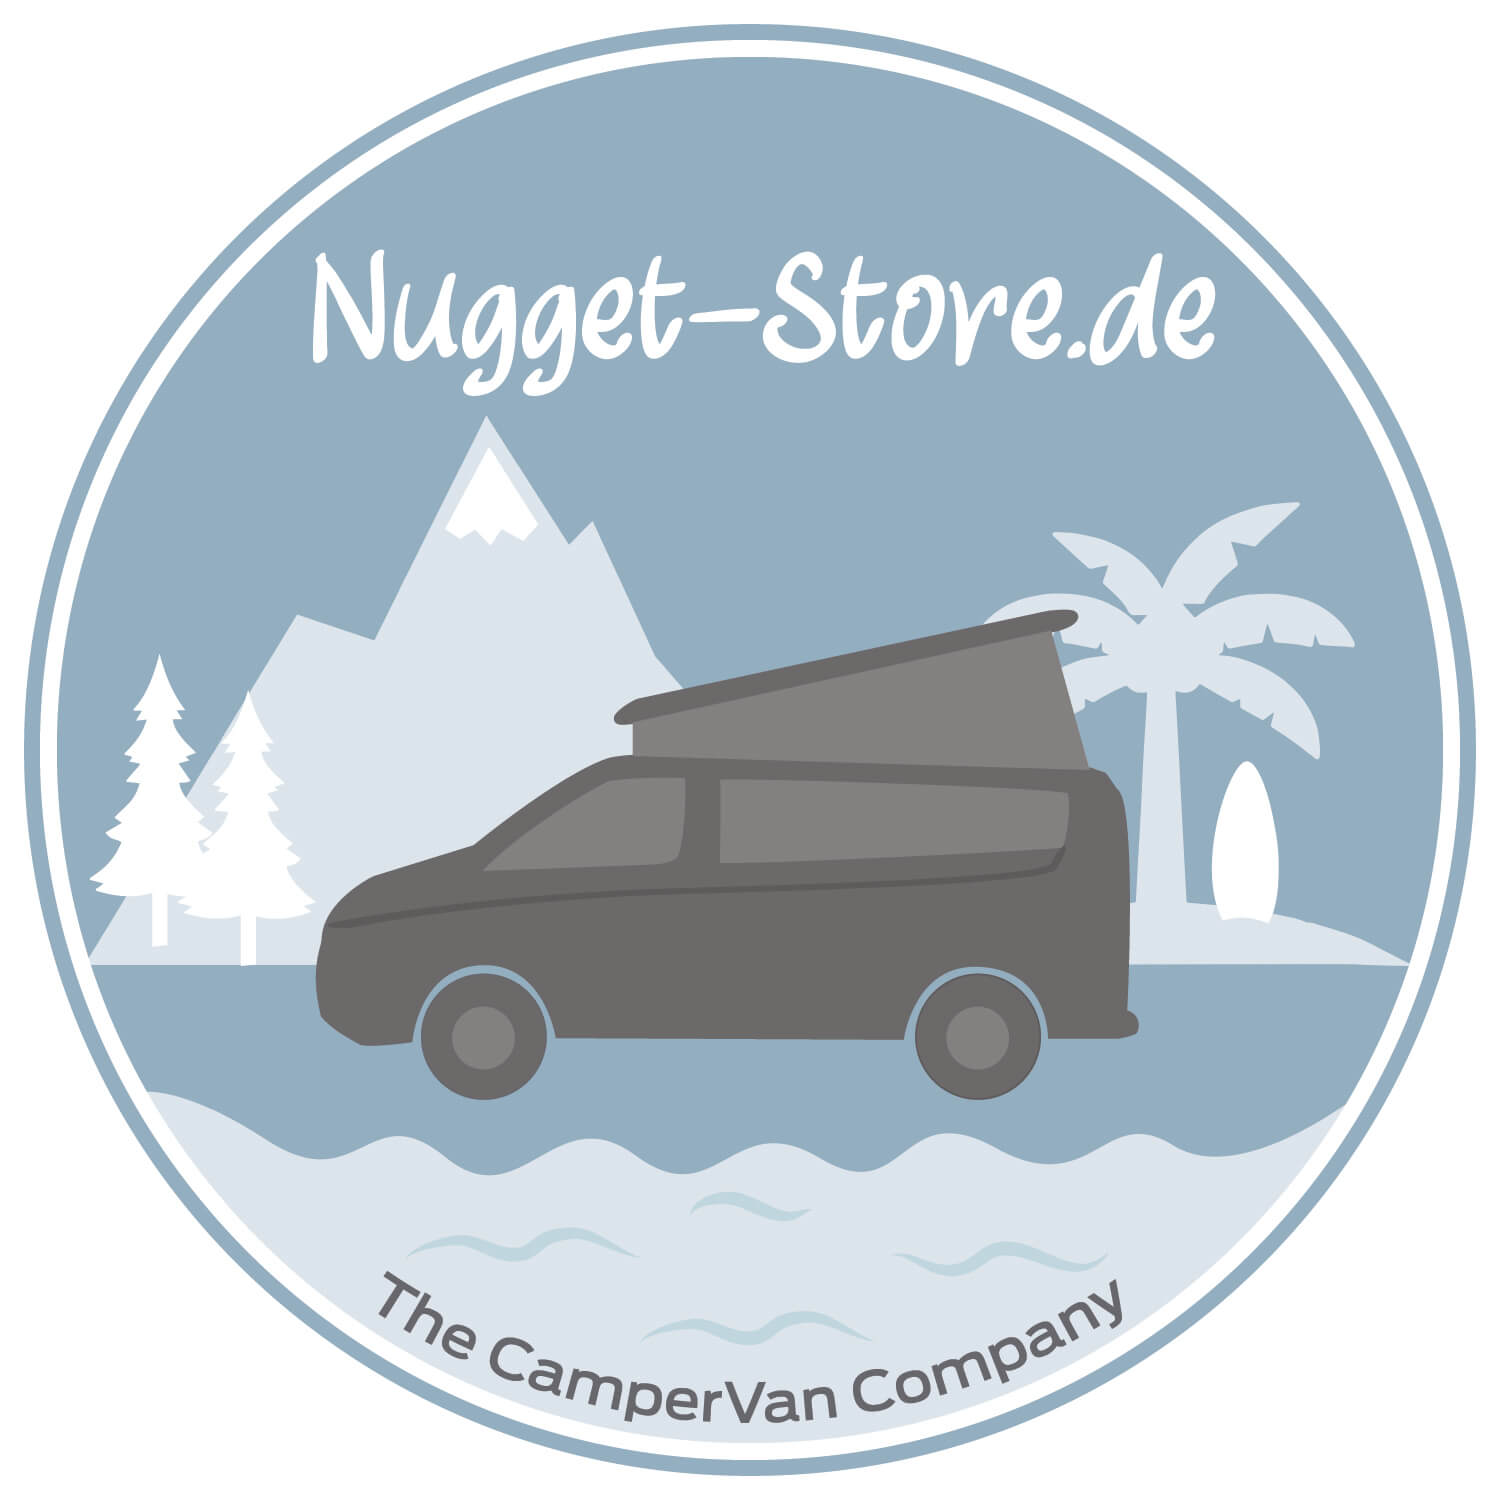 Nugget Store